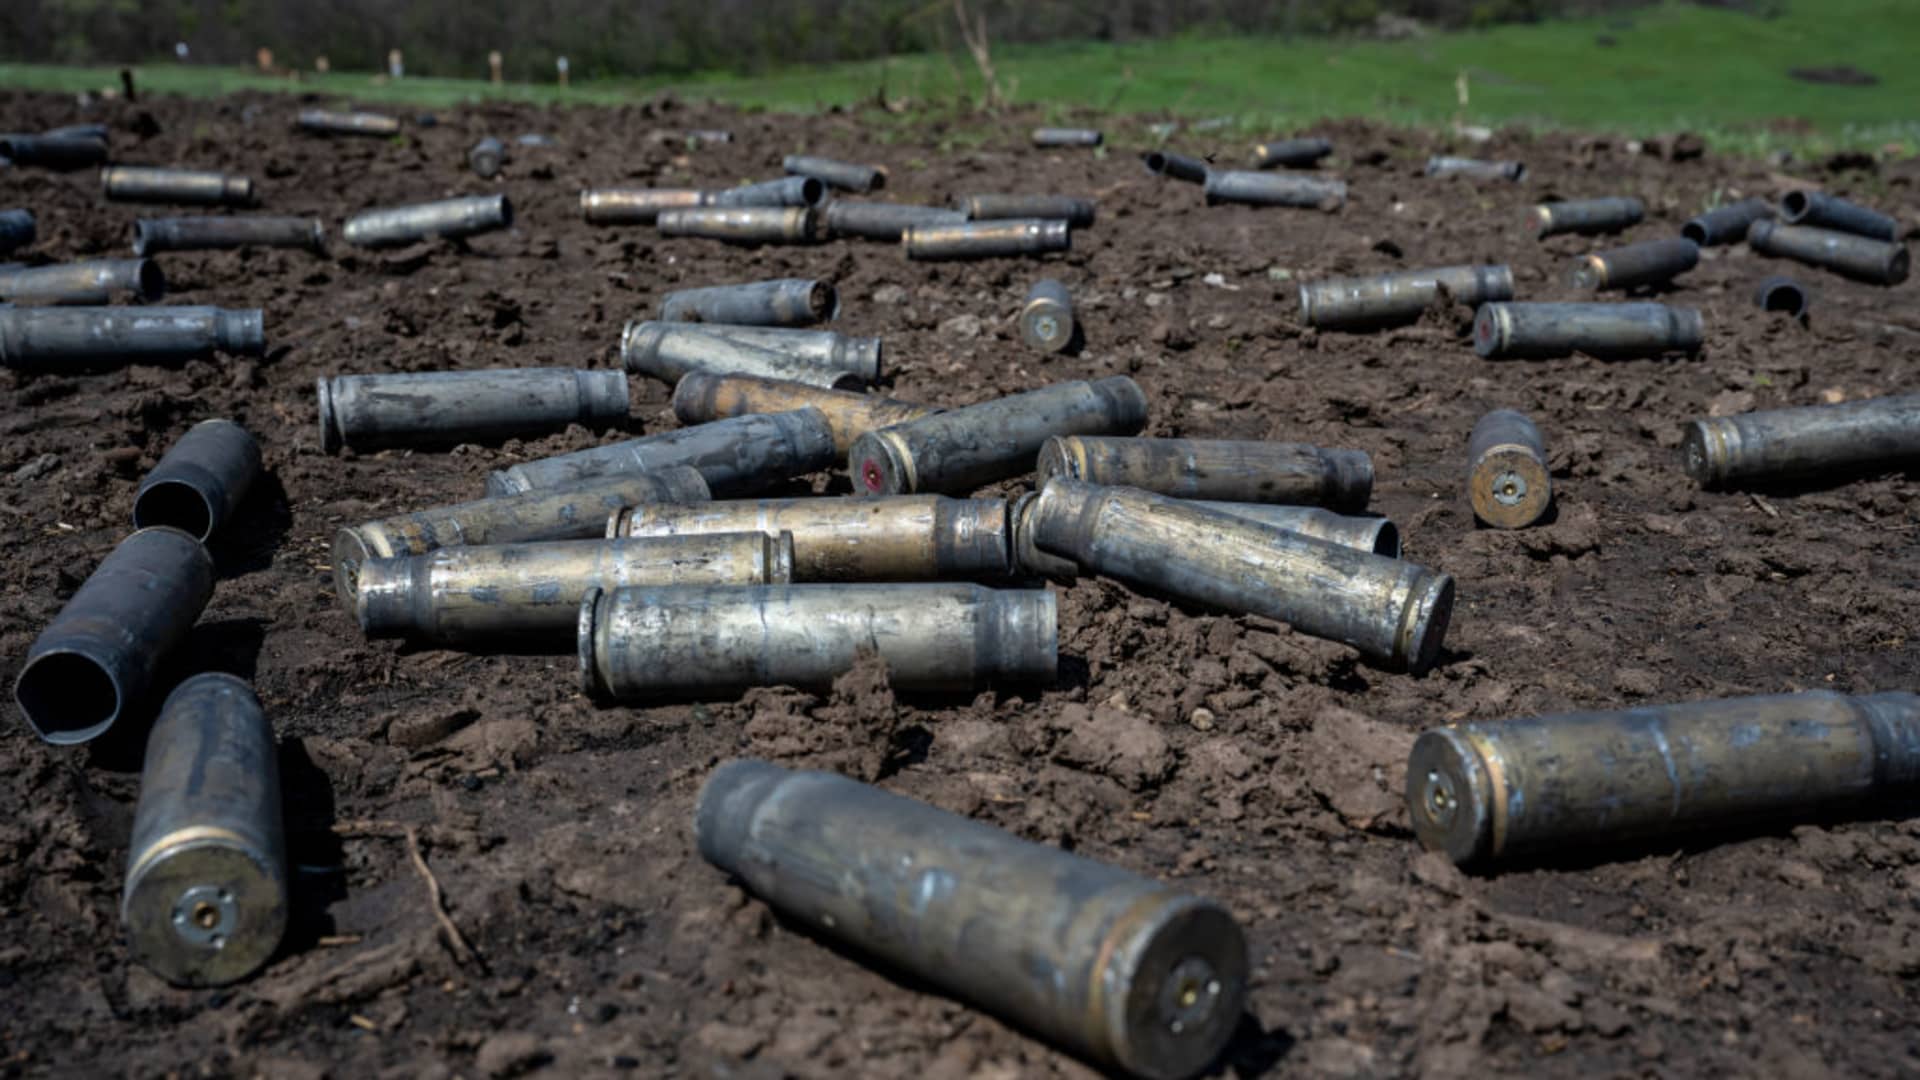 Spent cartridges from 30mm guns fired by armored vehicles litter the ground, as Ukrainian Armed Forces brigades train for a critical and imminent spring counteroffensive against Russian troops, which invaded 14 months earlier, in the Donbas region, Ukraine, on April 26, 2023.